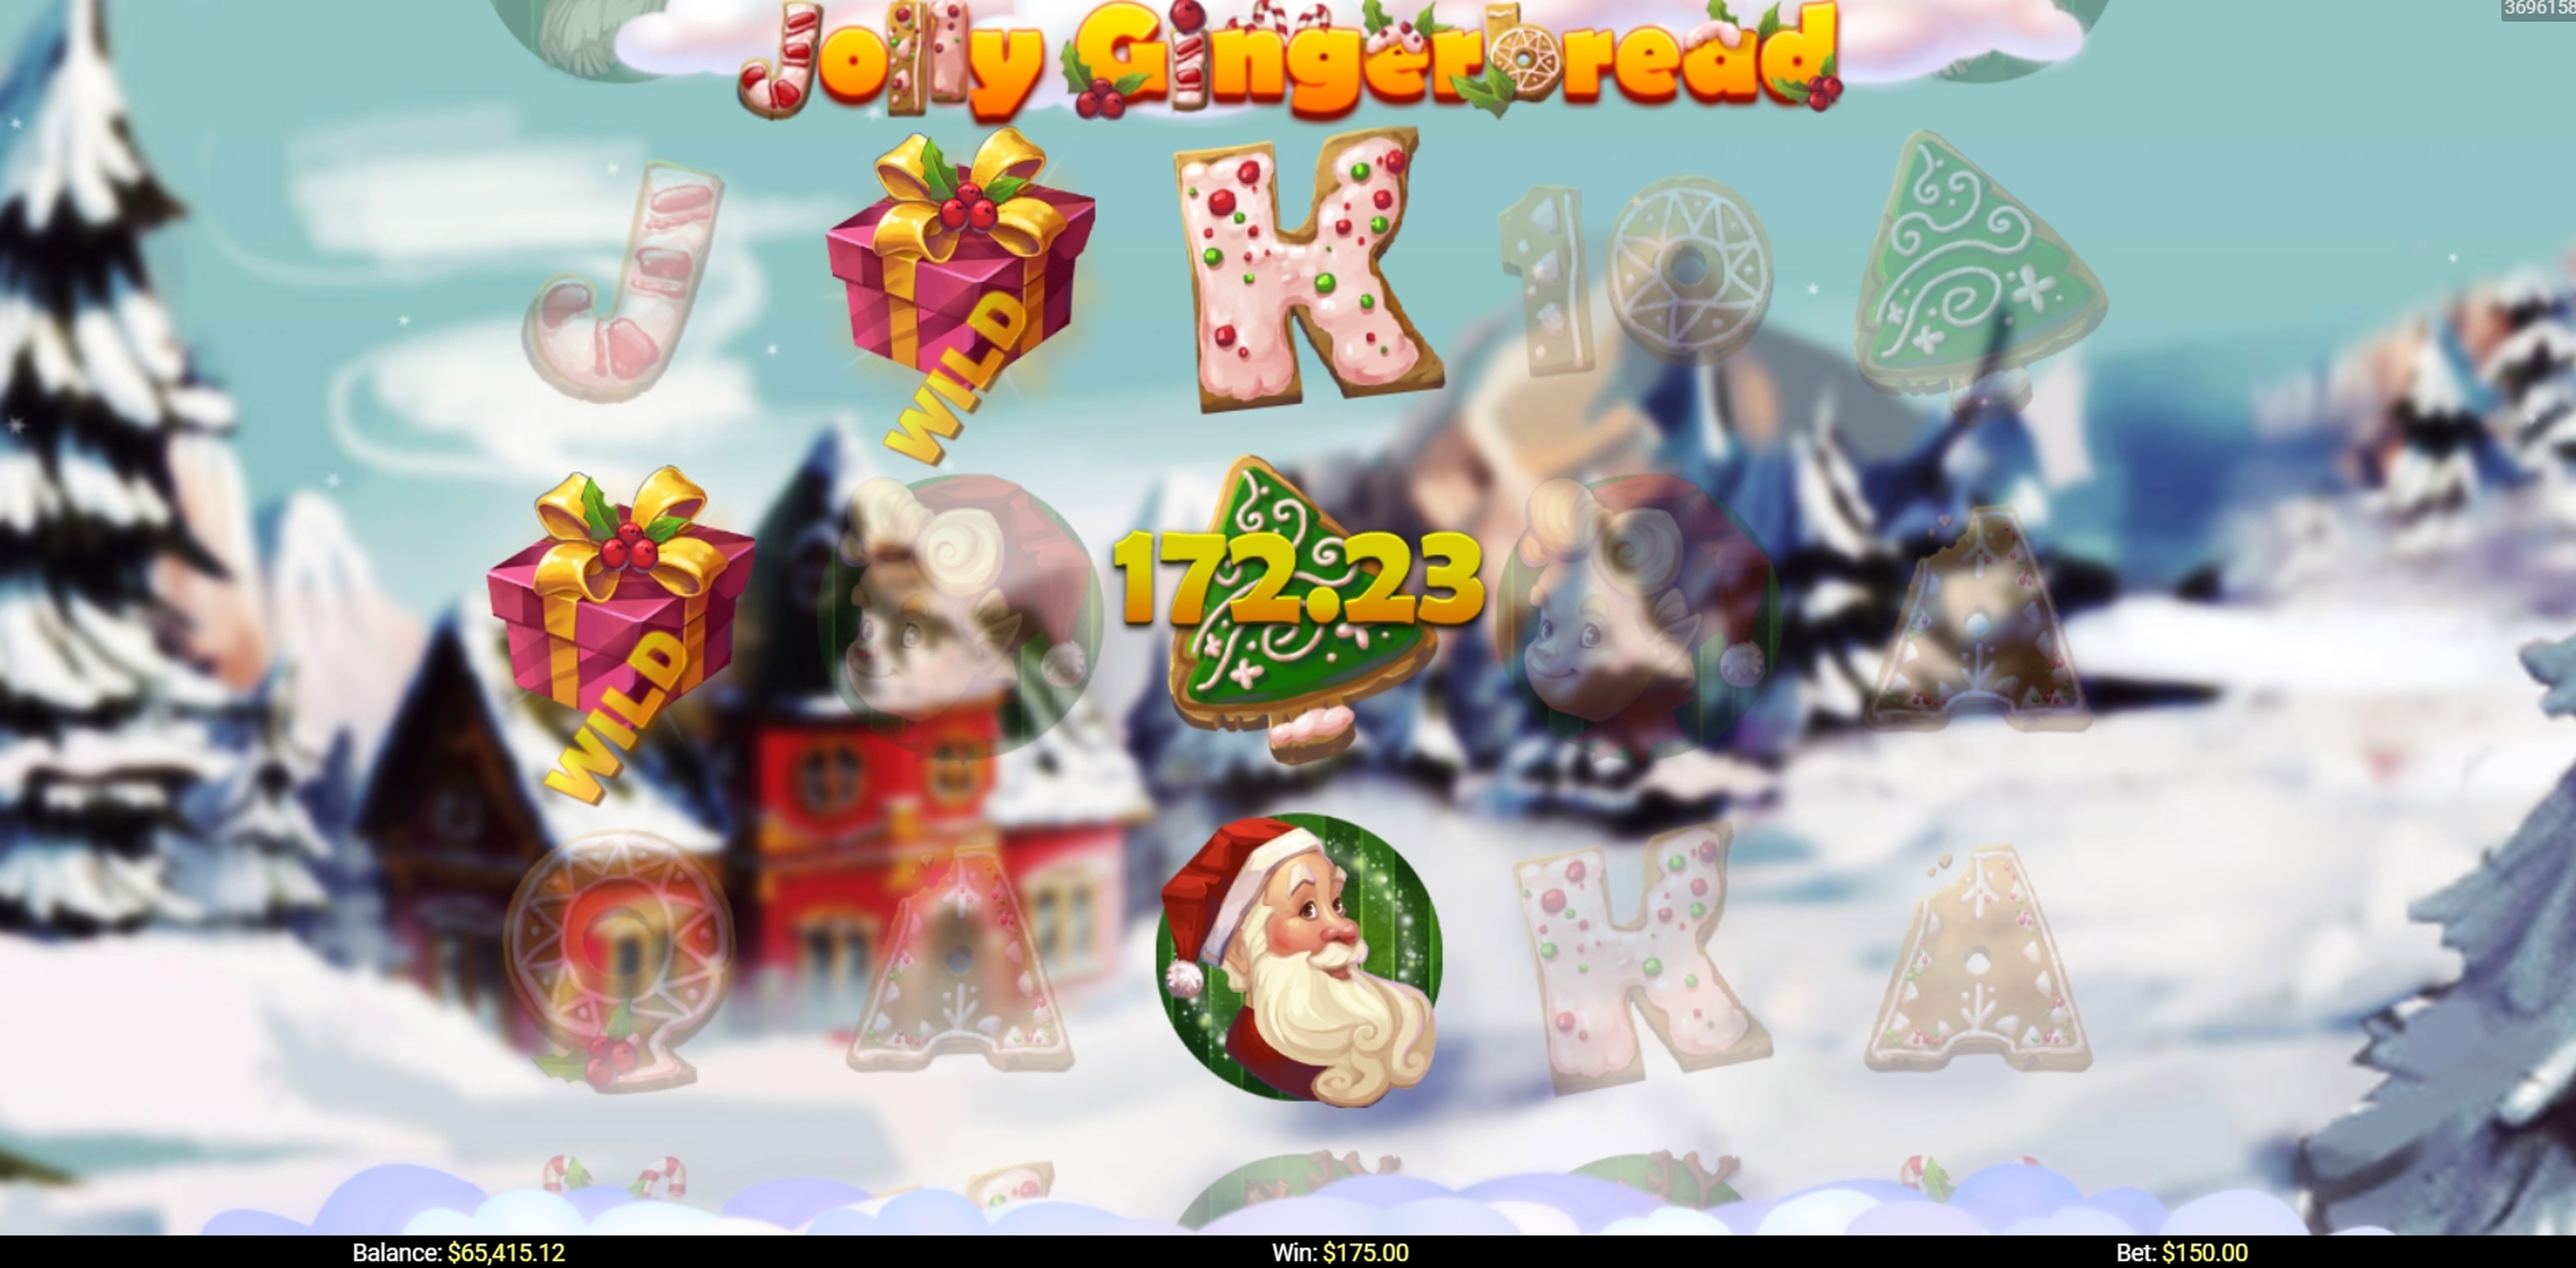 Win Money in Jolly Gingerbread Free Slot Game by Mobilots